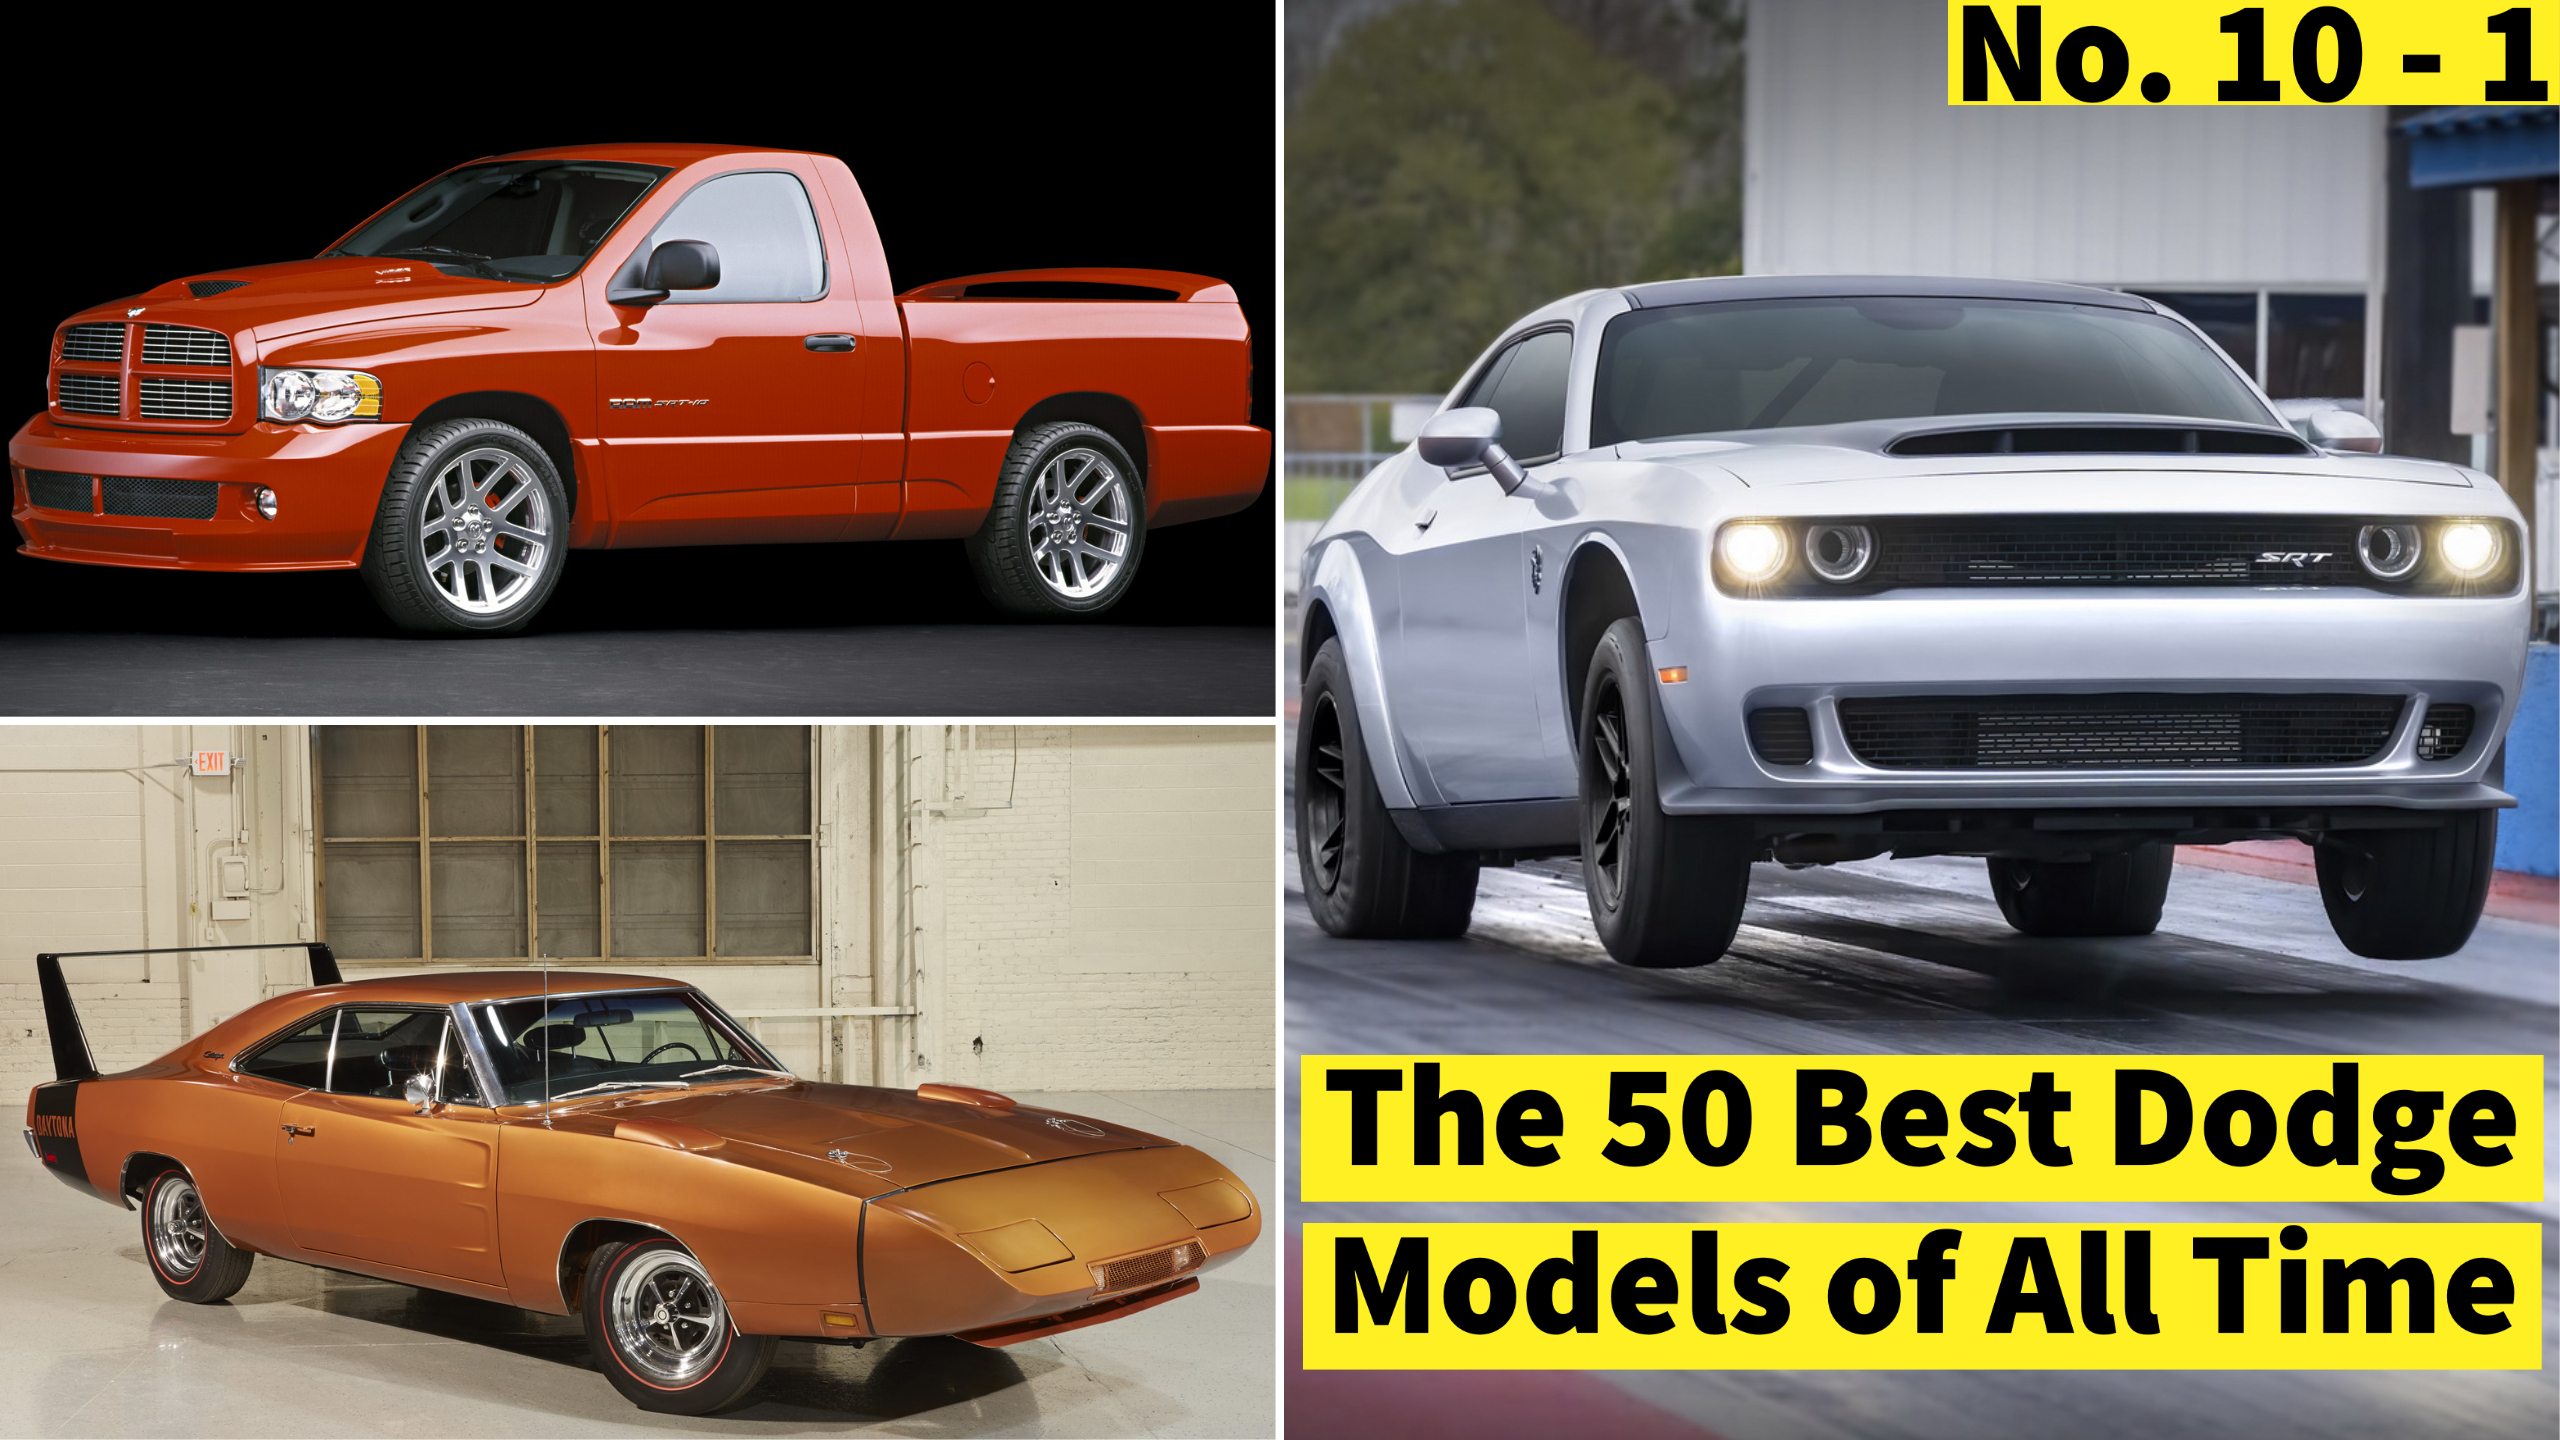 The Hottest Cars of All Time